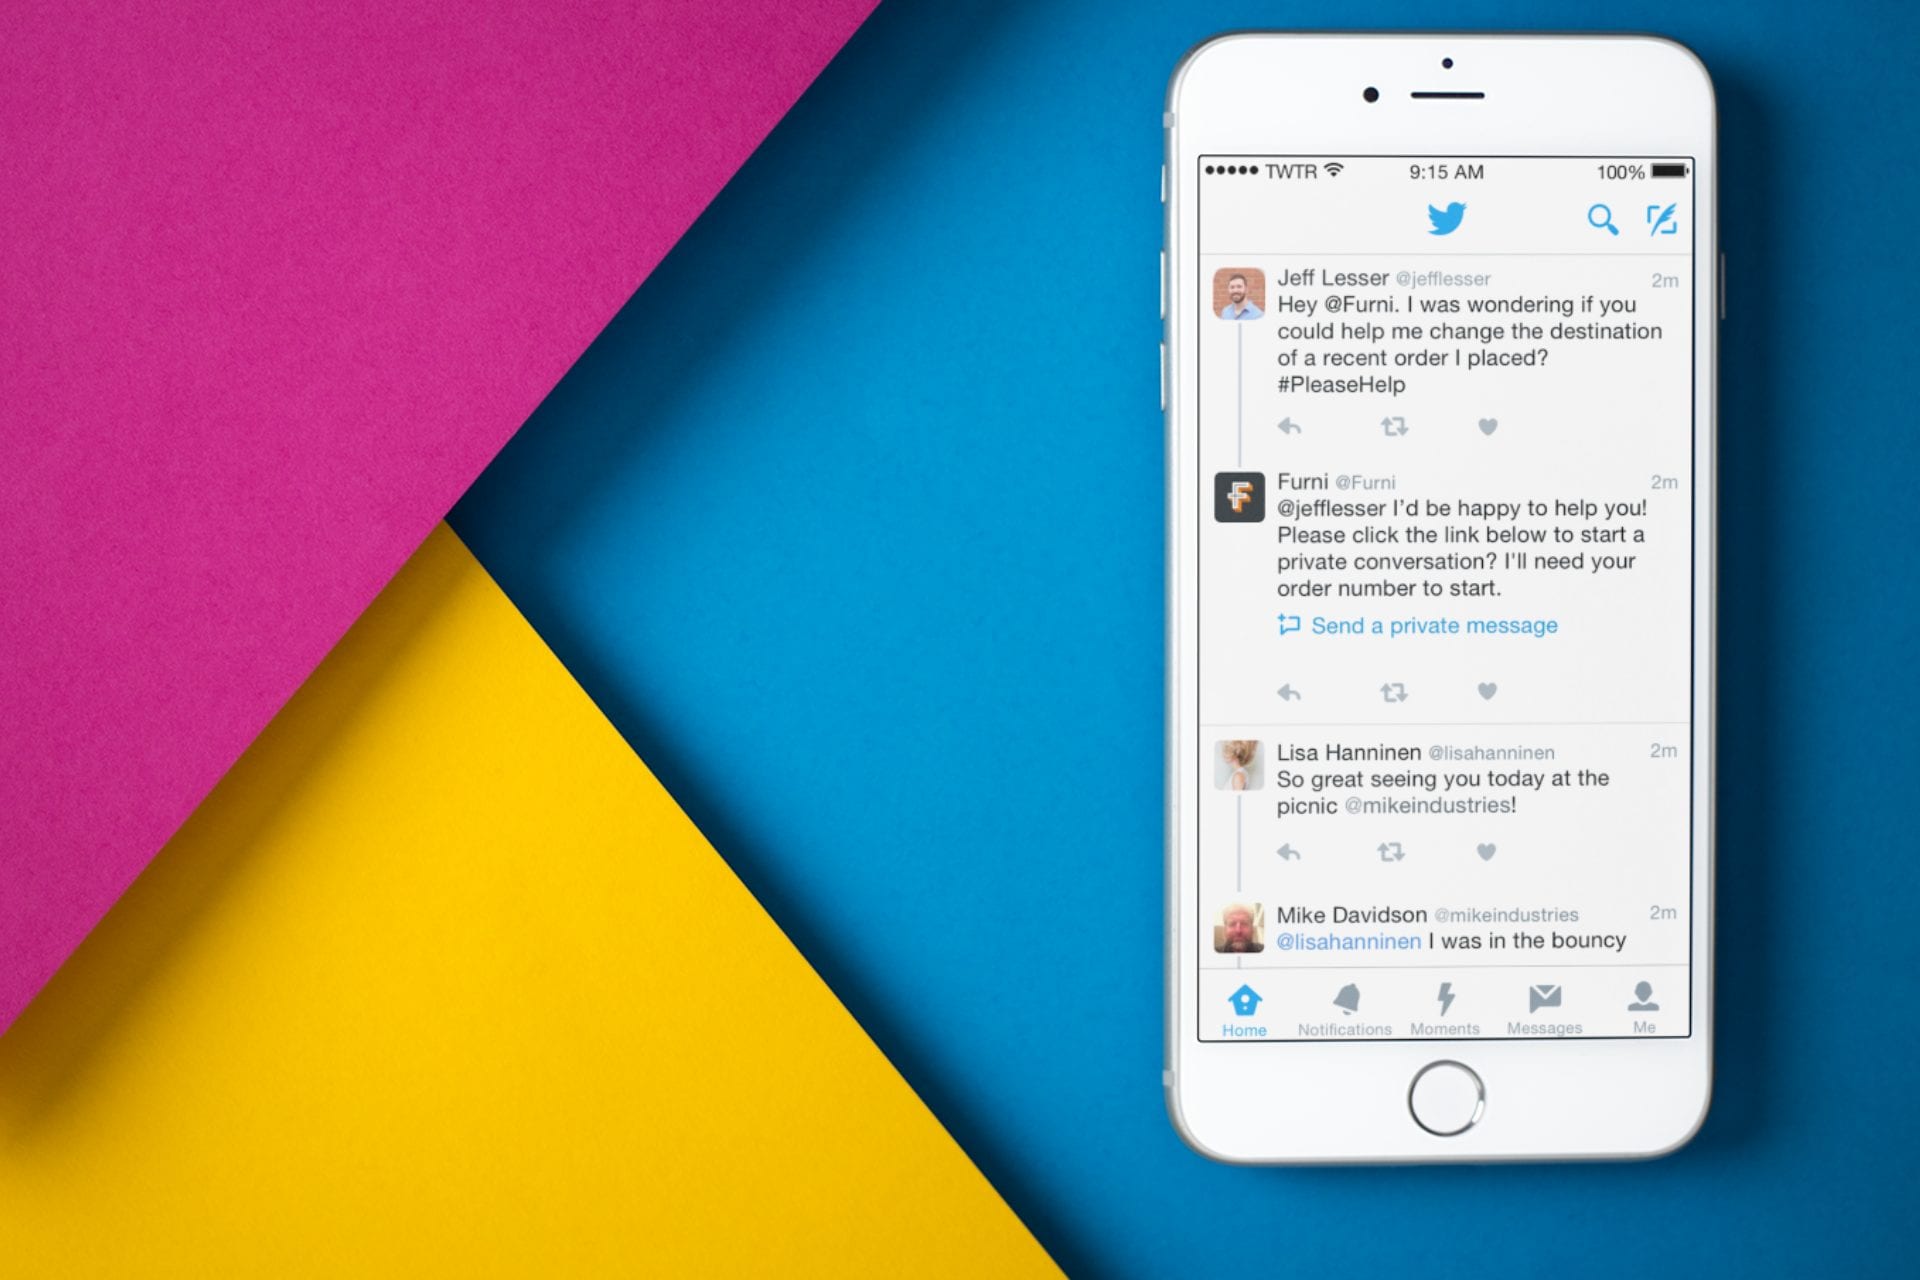 twitter account on a mobile with blue, yellow and pink background